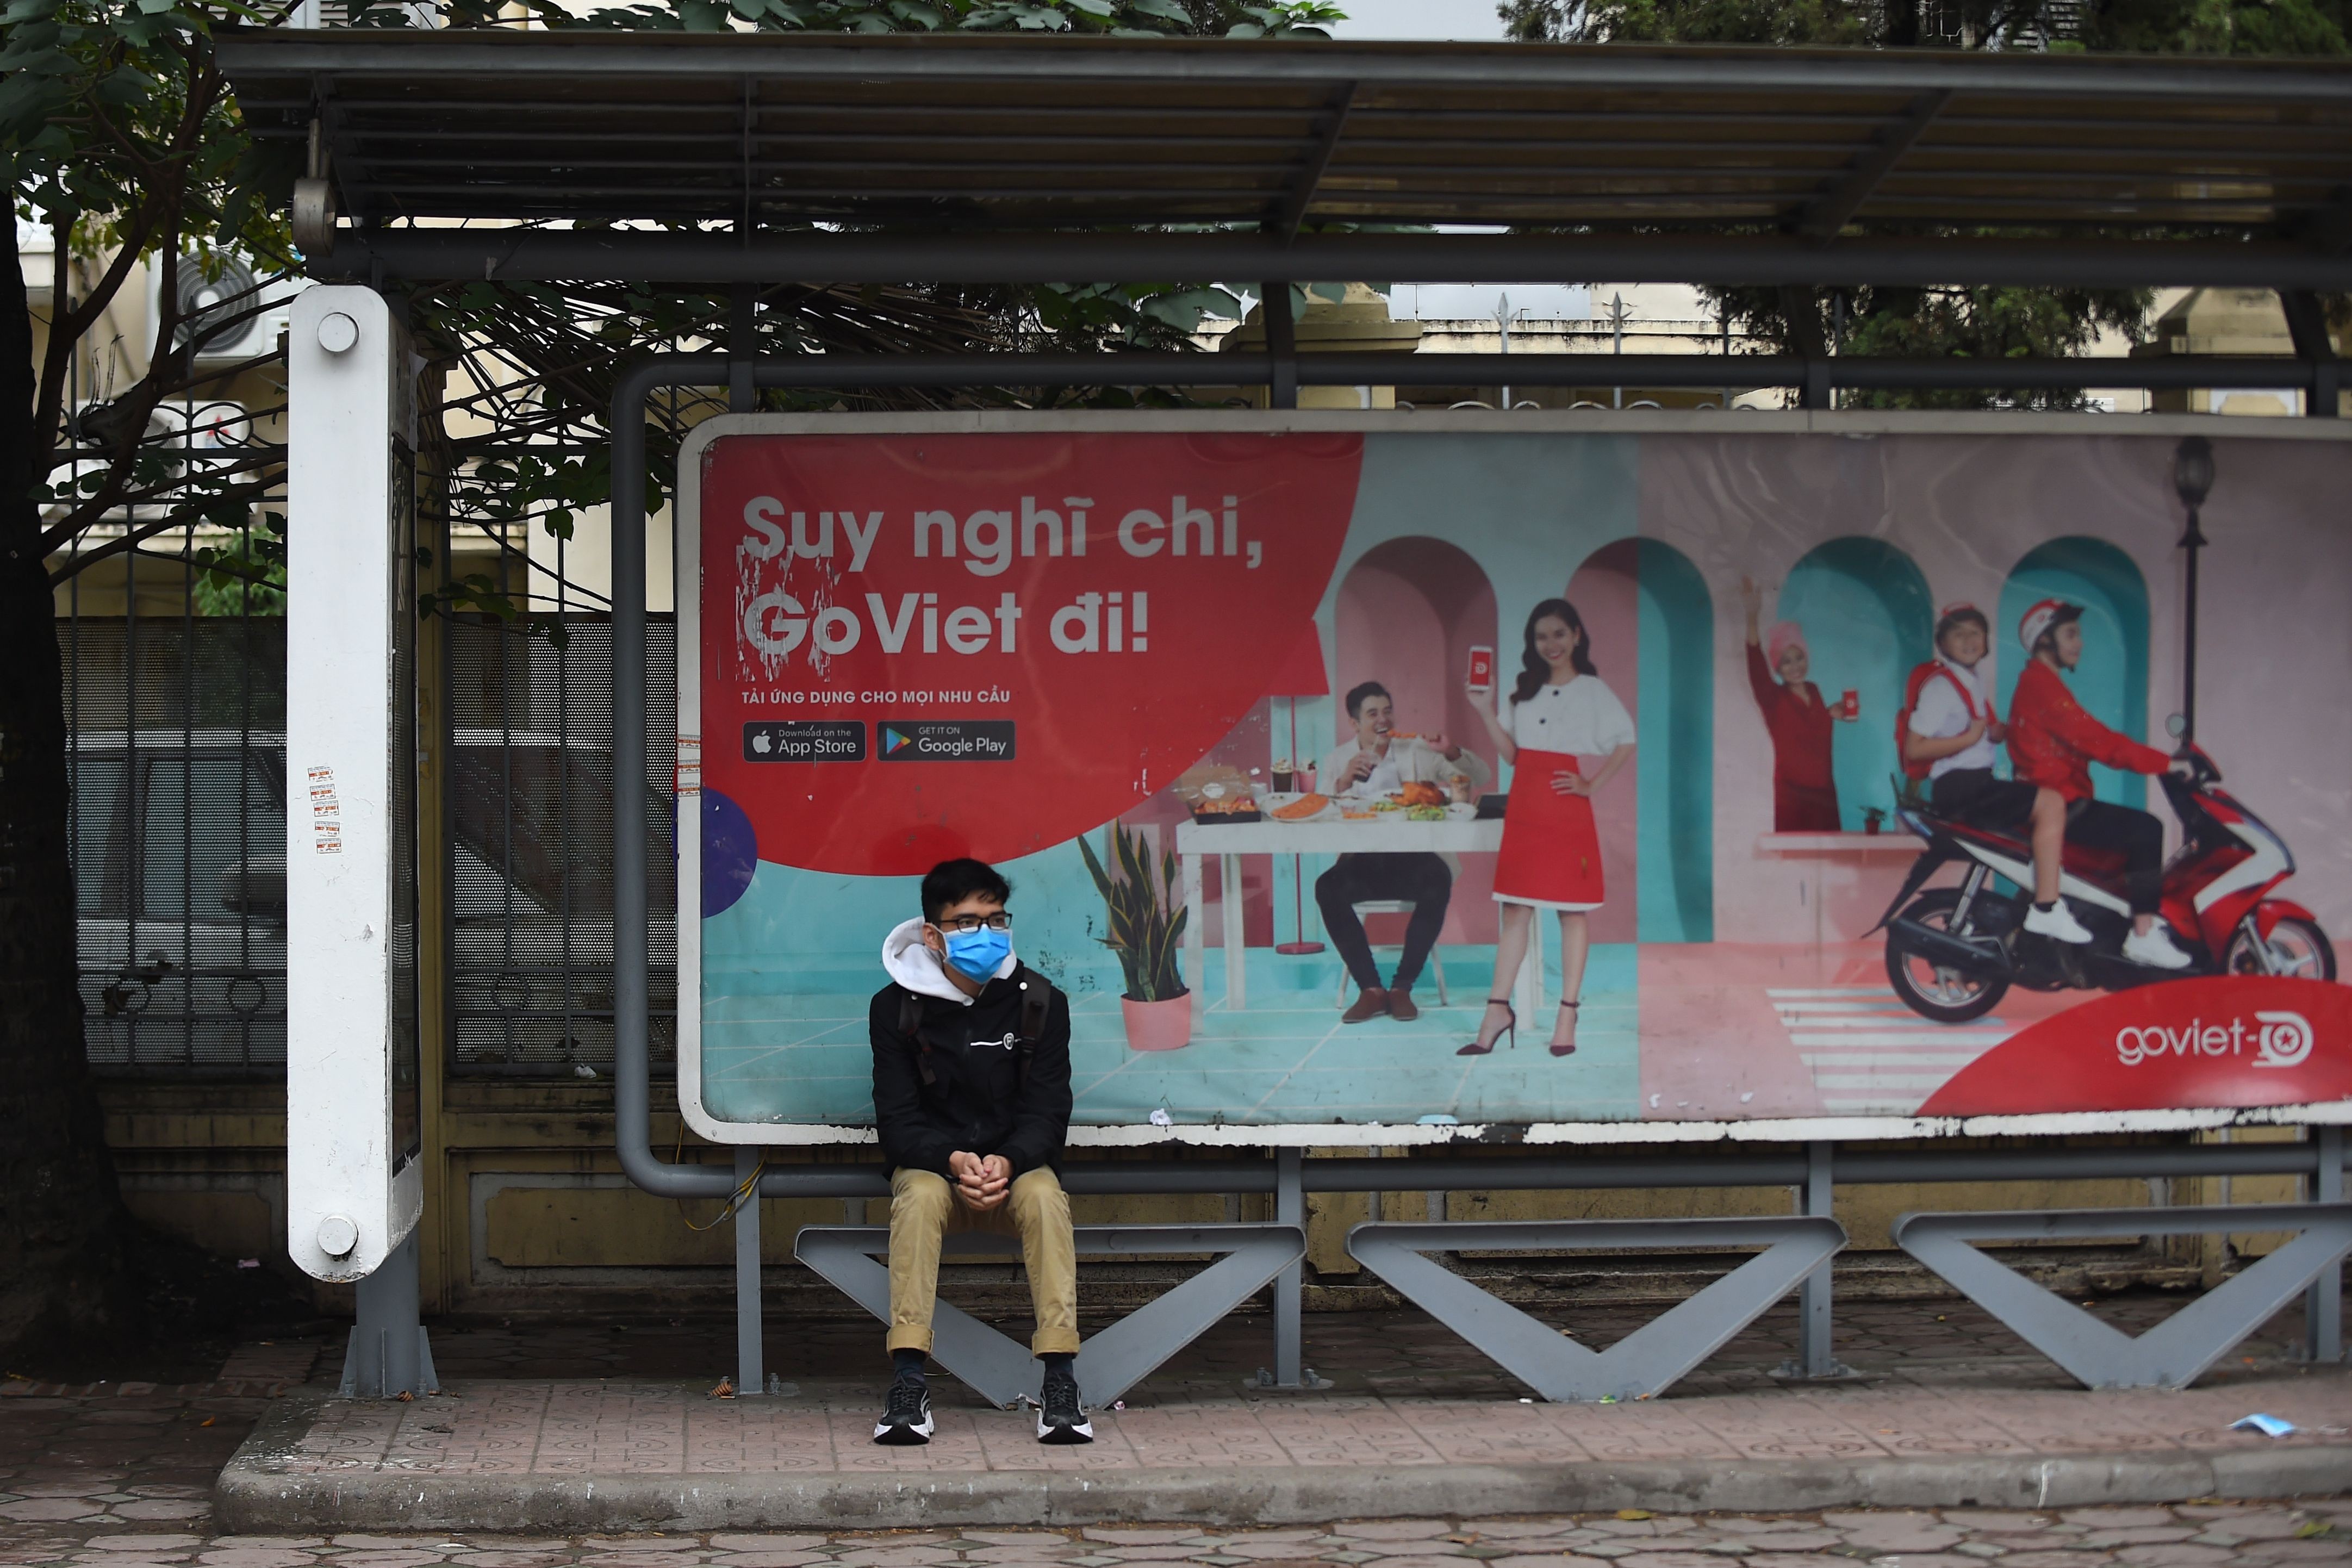 A man wearing a protective facemask sits at a bus stop in Hanoi amid rising concerns over the novel coronavirus outbreak. Photo: AFP